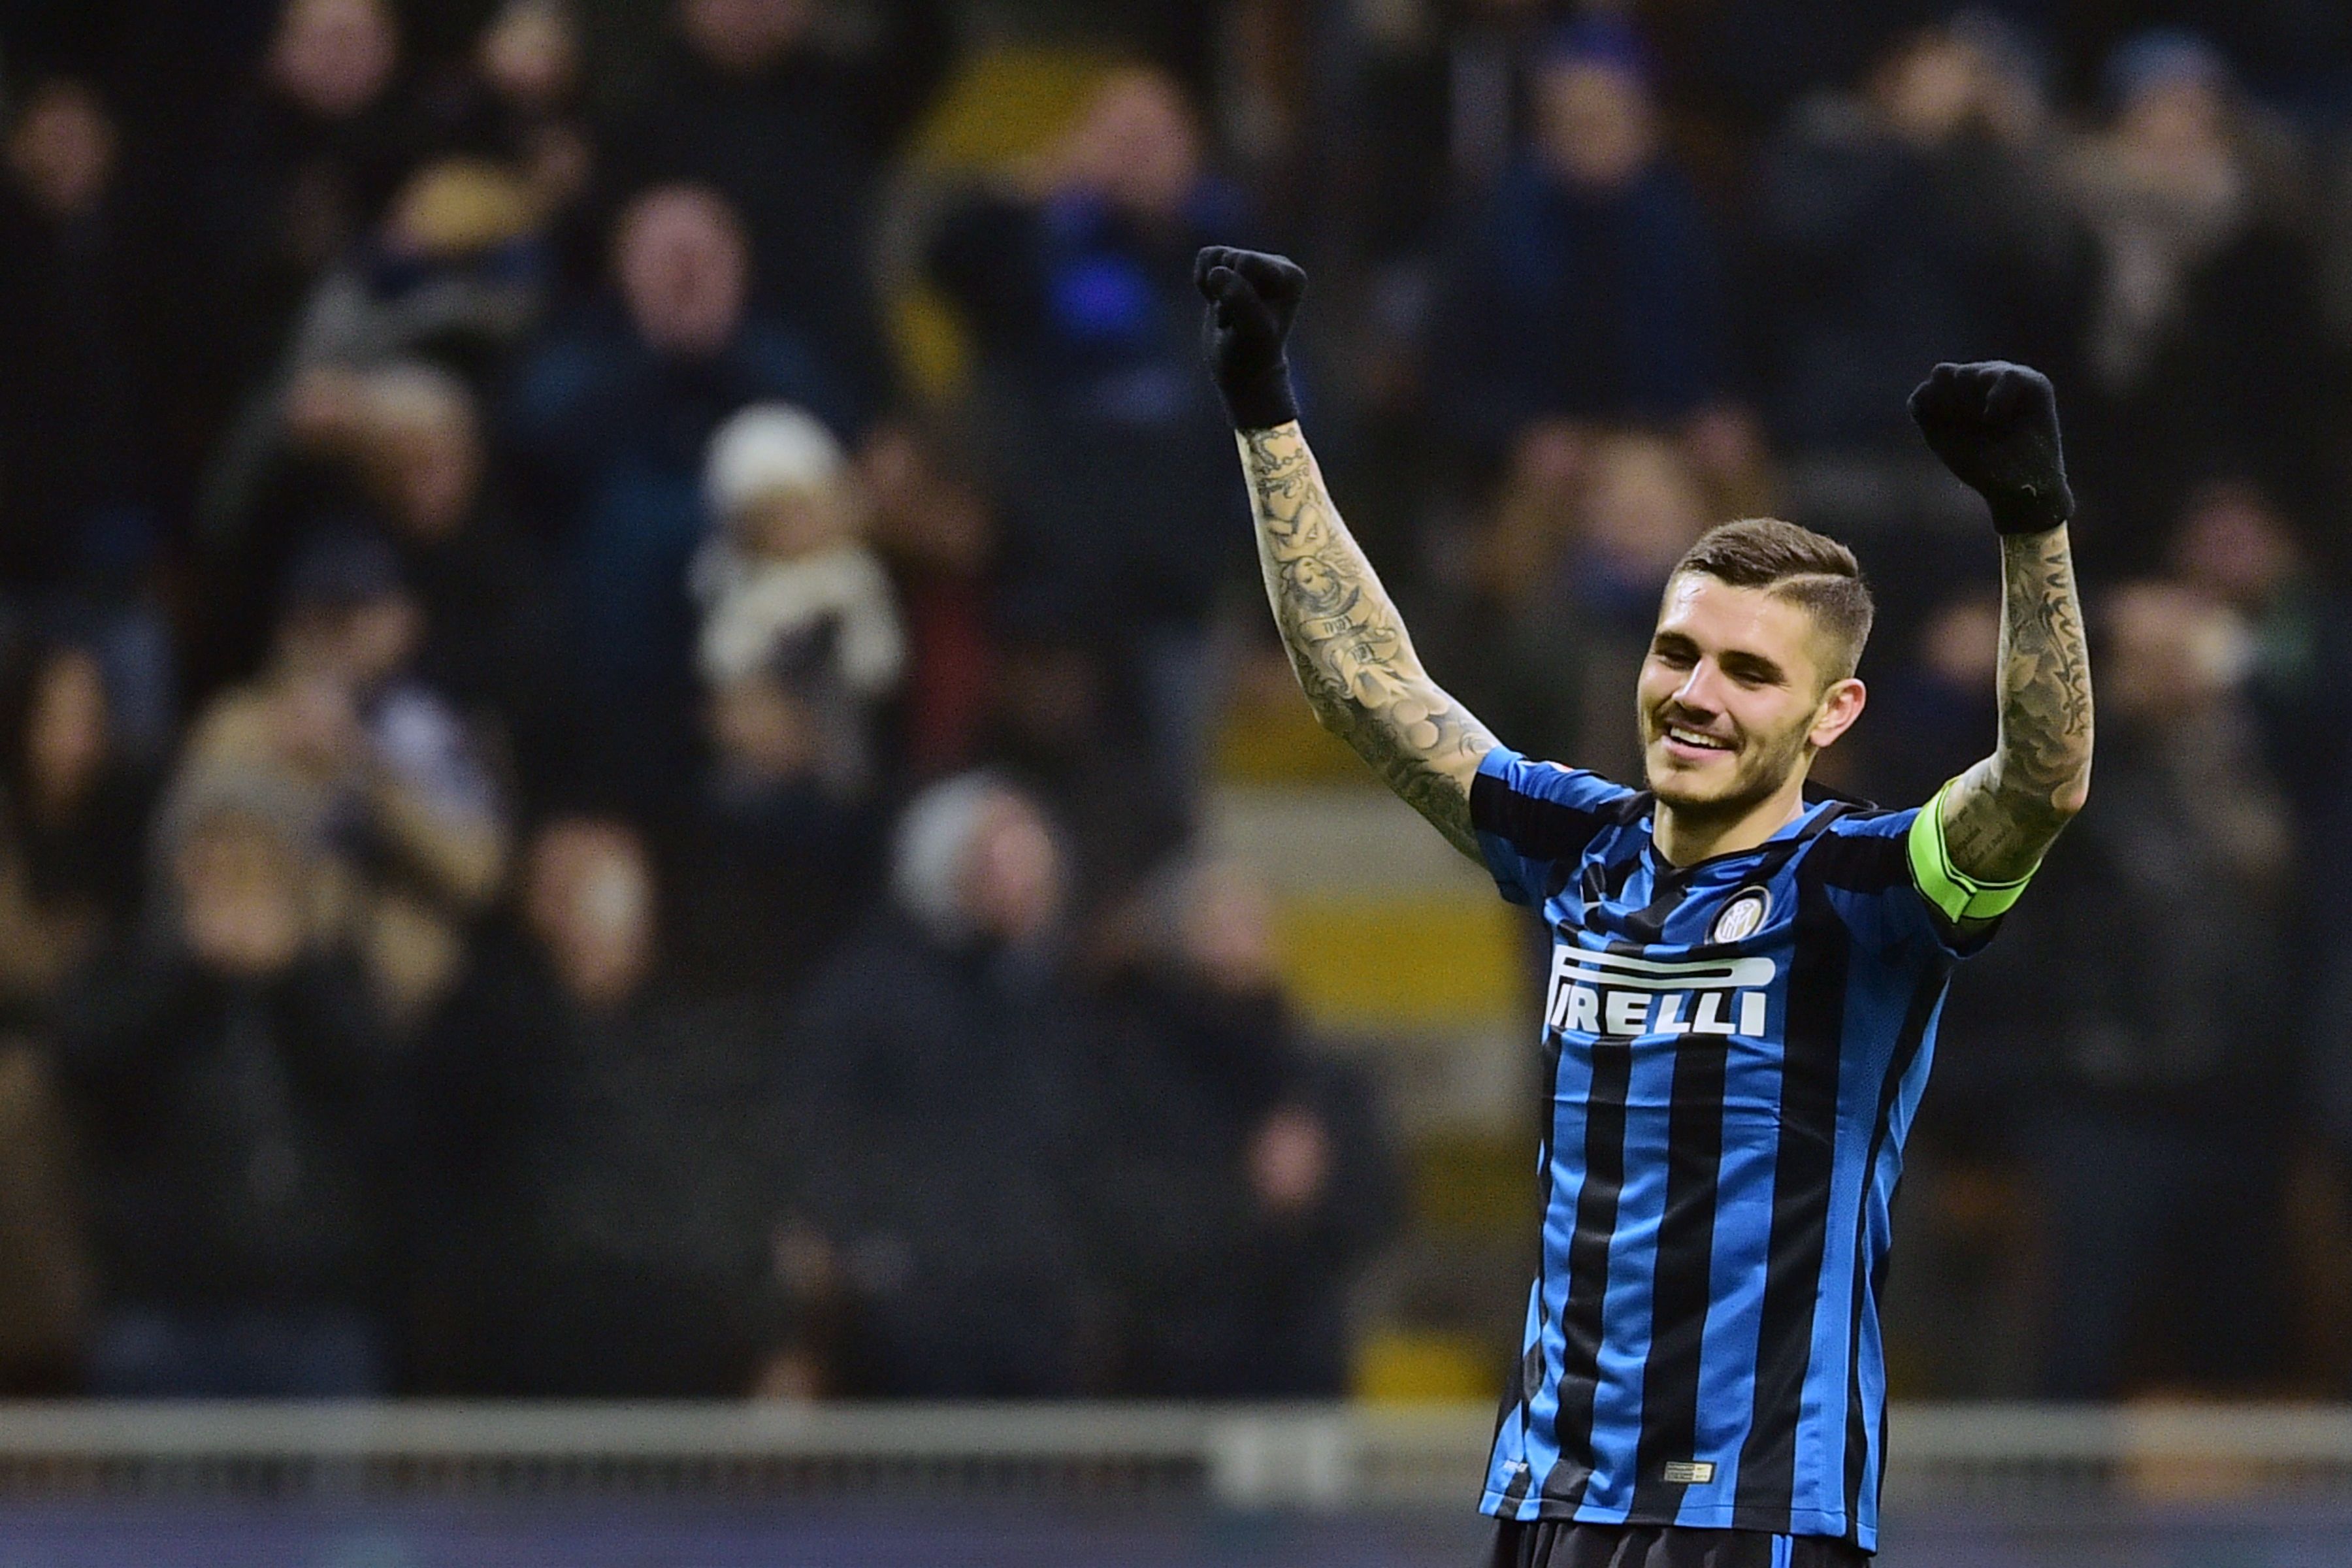 Inter Milan's Argentinian forward Mauro Icardi celebrates after scoring a goal during the Italian Serie A football match Inter Milan vs Palermo at the San Siro Stadium in Milan on March 6, 2016. / AFP / GIUSEPPE CACACE (Photo credit should read GIUSEPPE CACACE/AFP/Getty Images)